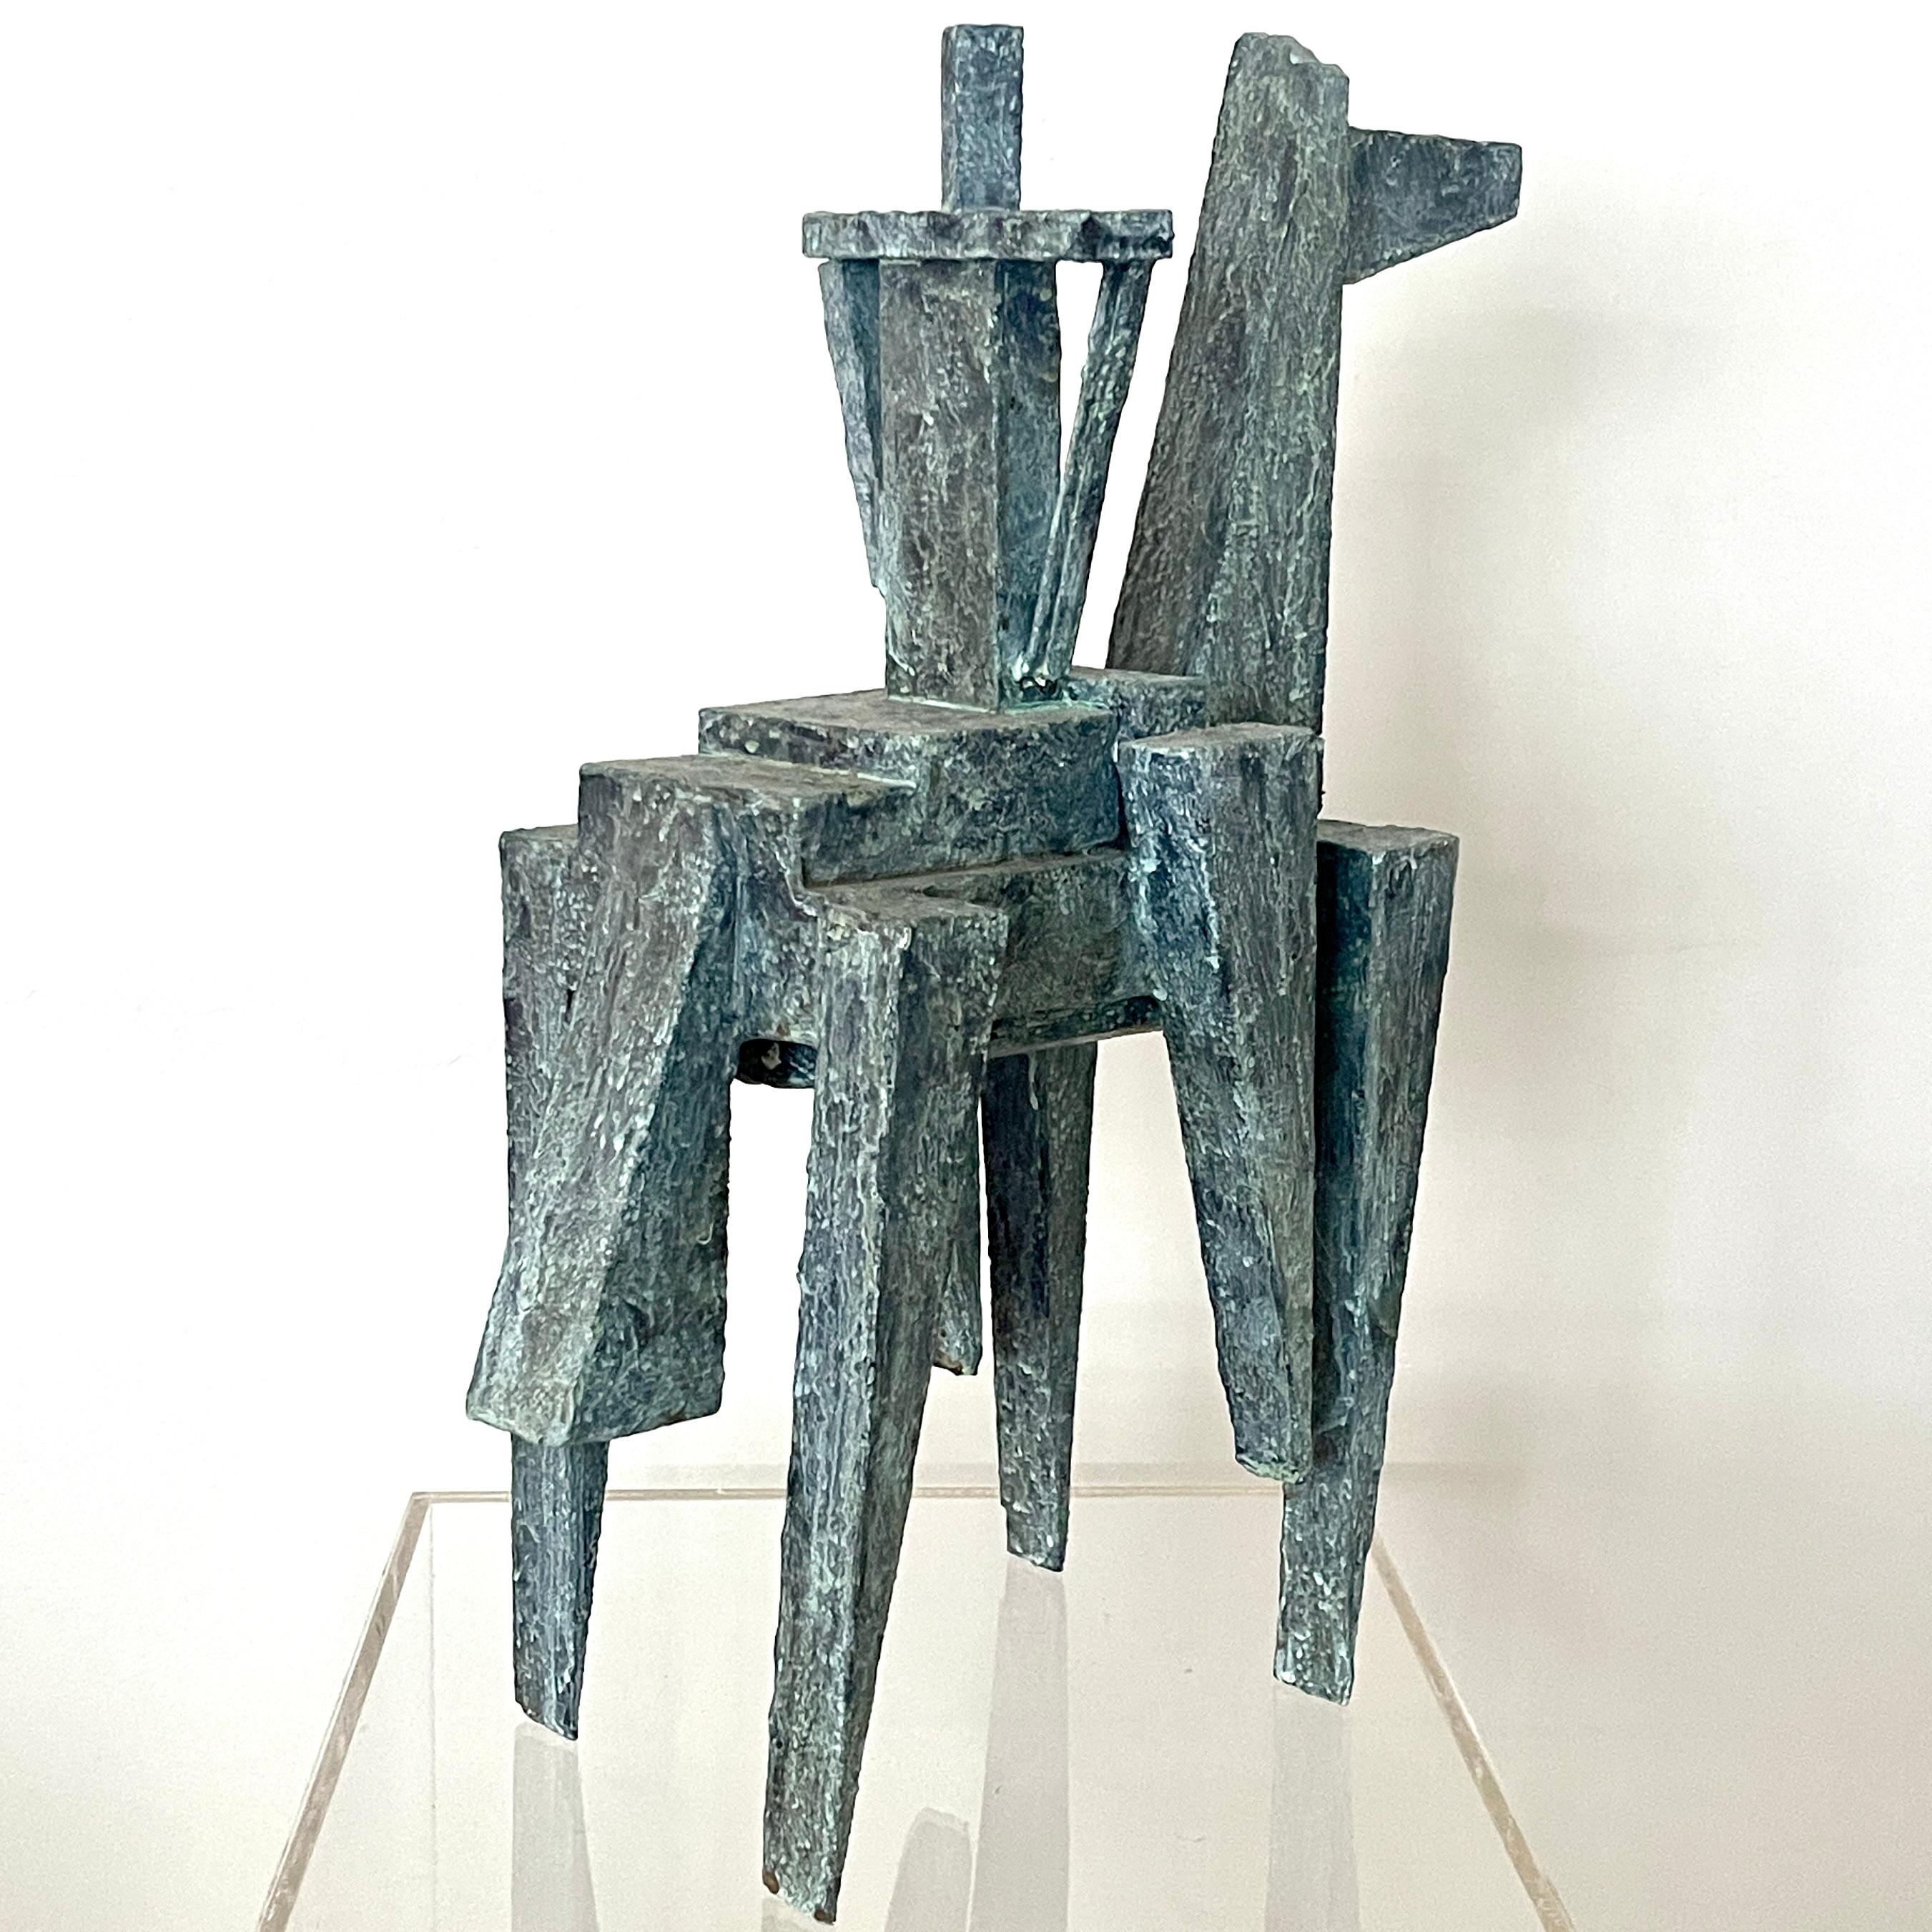 Modernist Cubist Sculpture by Bill Low with Weathered Bronze Finish